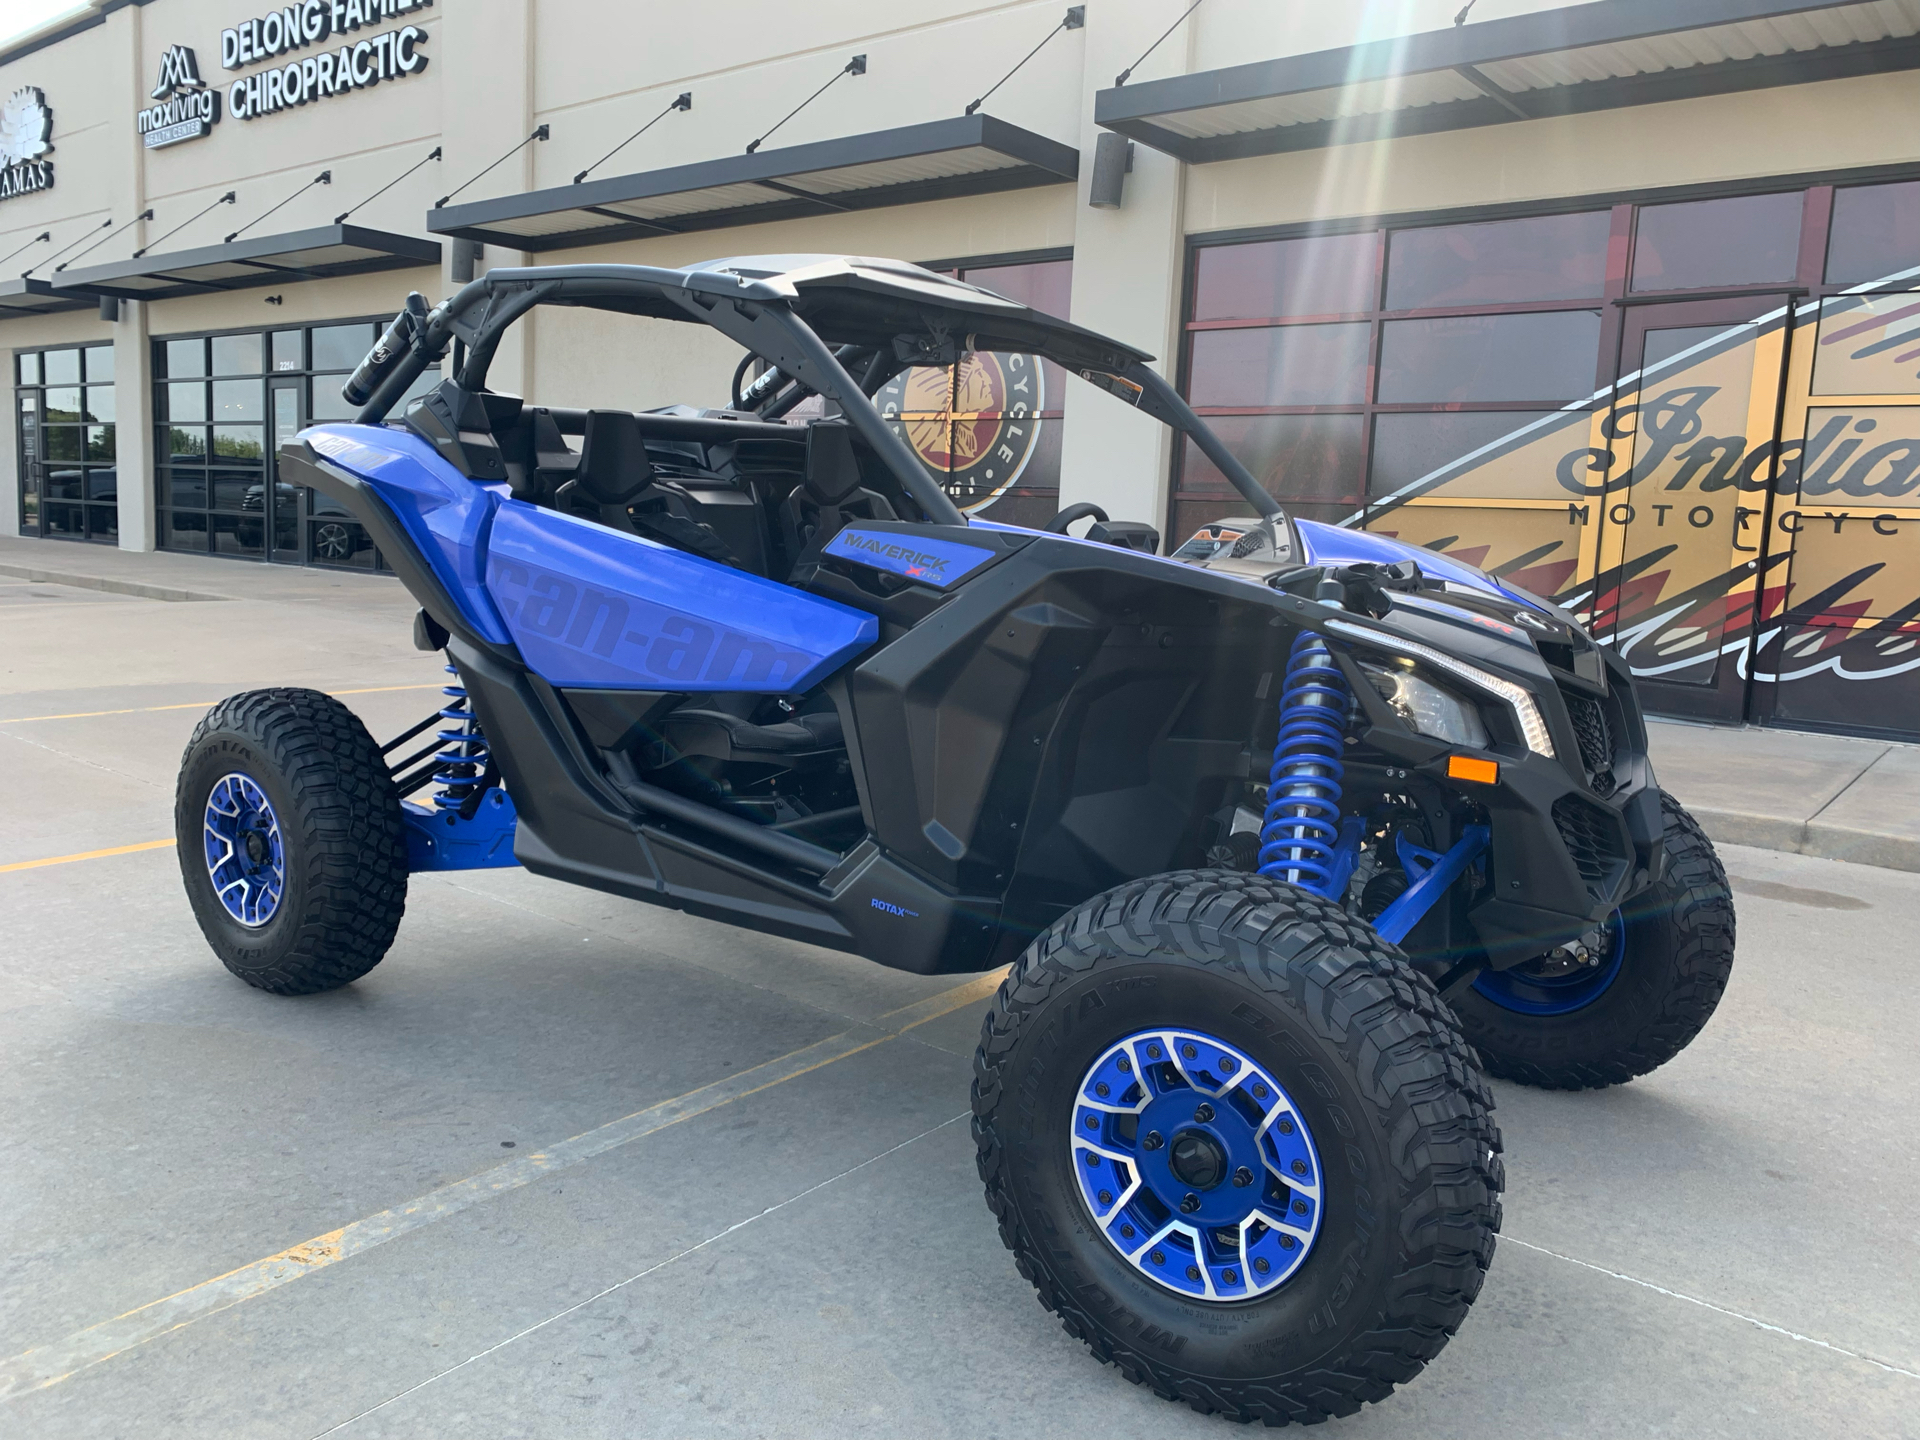 2021 Can-Am Maverick X3 X RS Turbo RR in Norman, Oklahoma - Photo 2